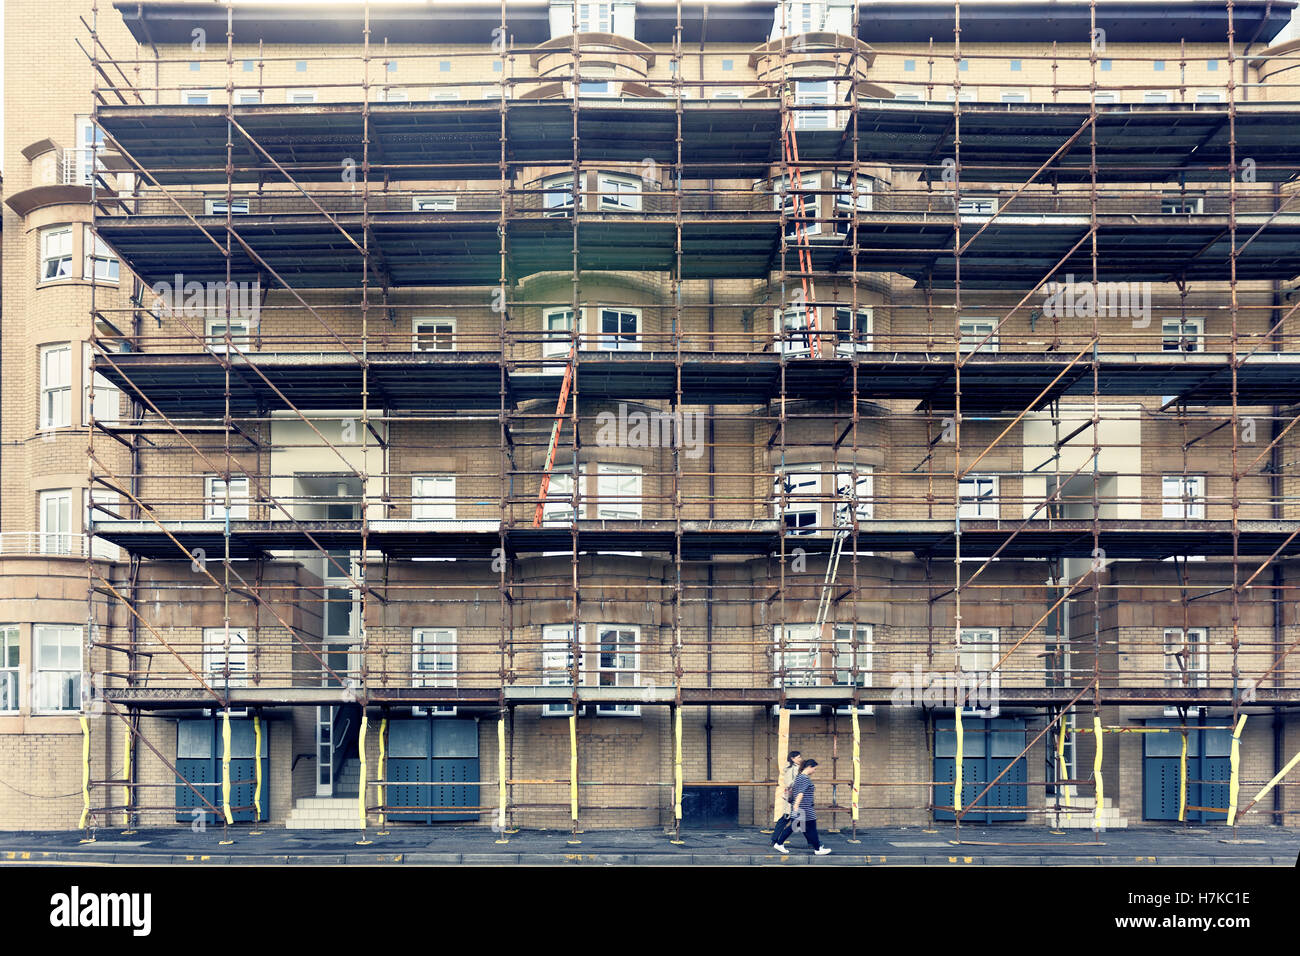 Scaffolding and ladders building graphic shot Stock Photo